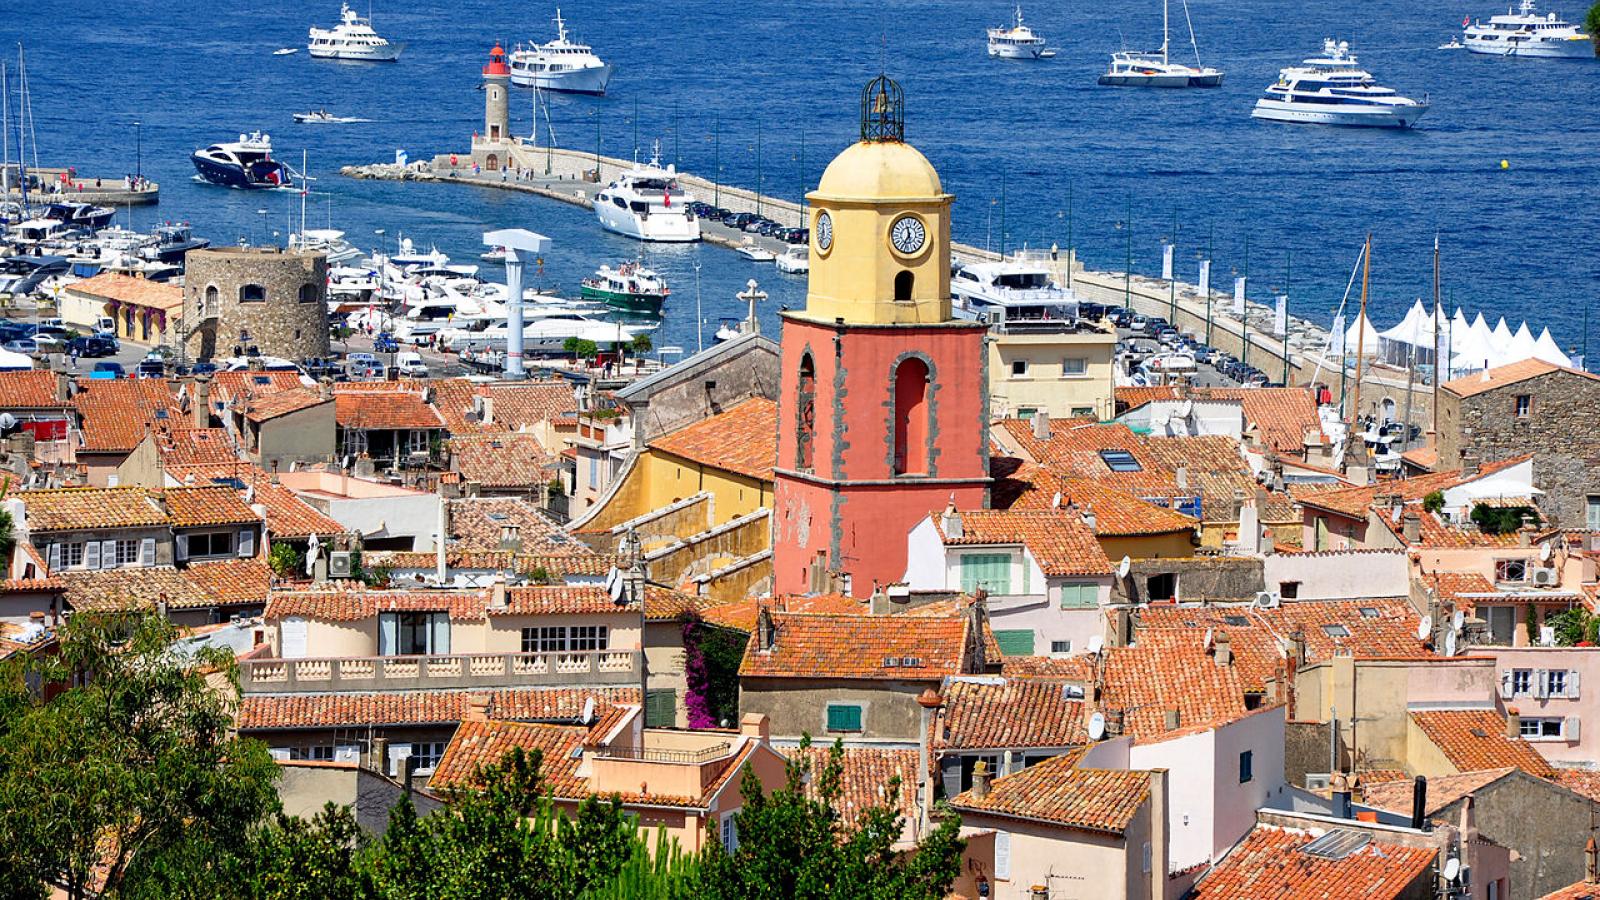 Experience Heritage Days in Saint-Tropez